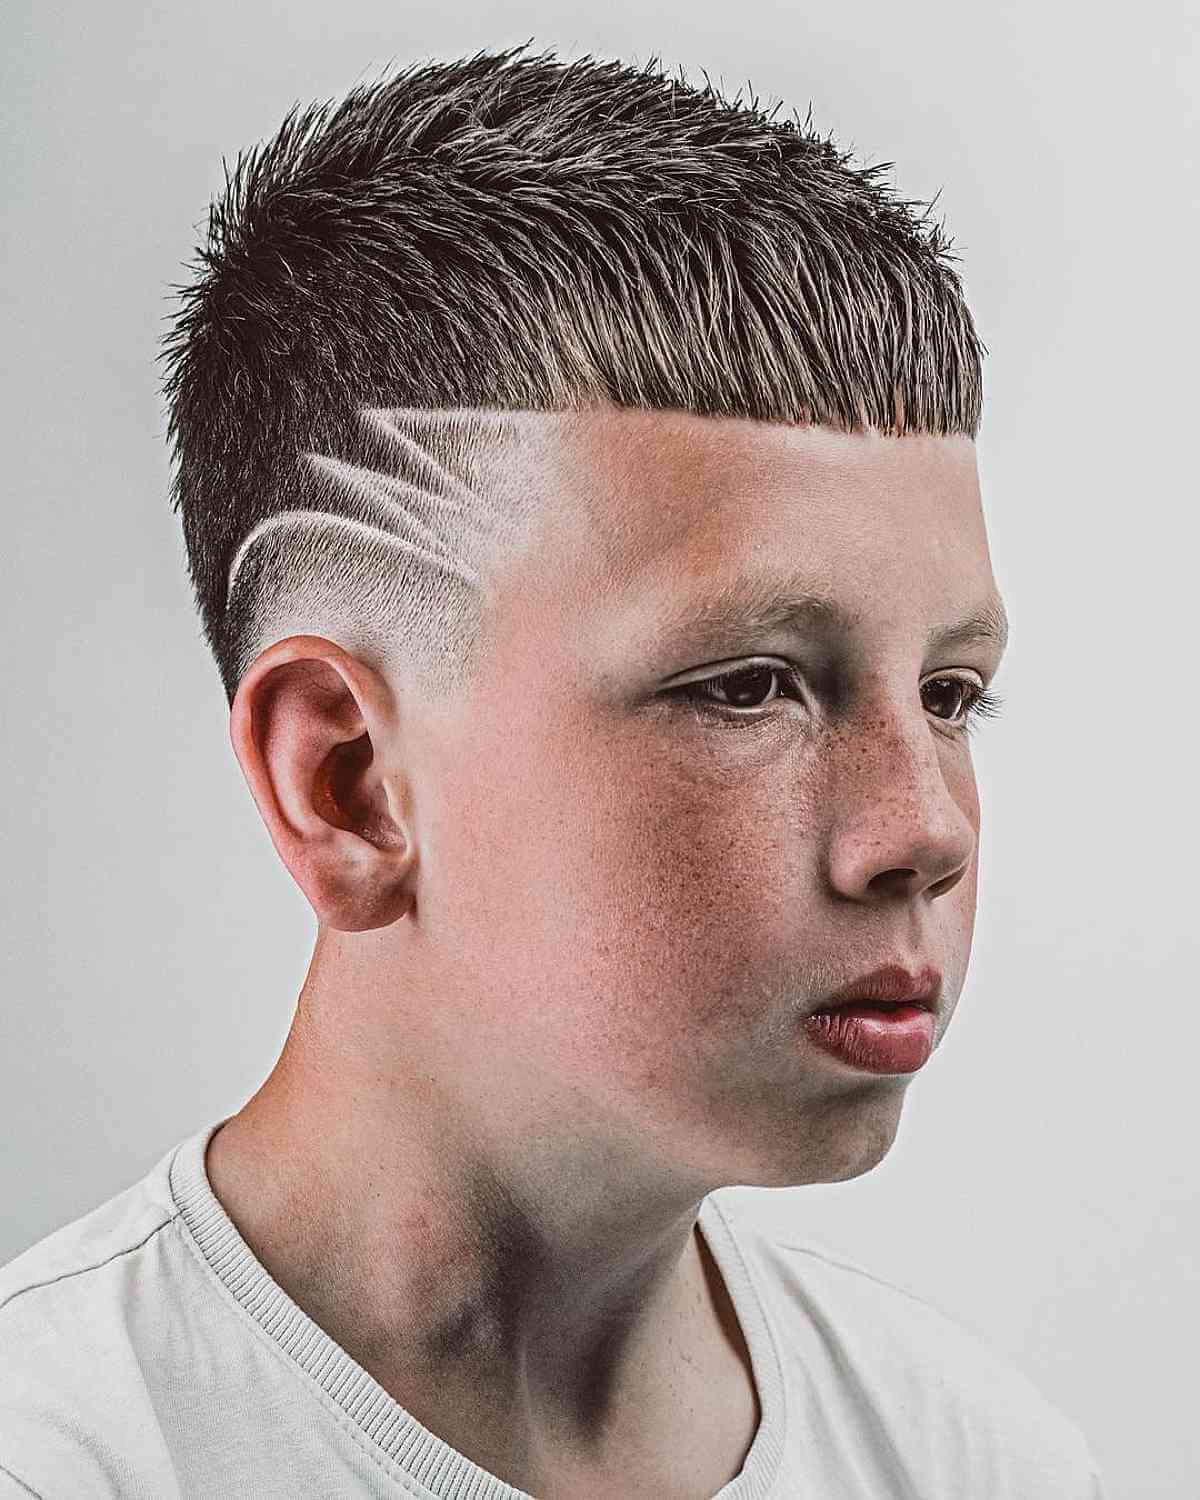 50+ Different Hairstyles For Boys In 2023 - Find Health Tips